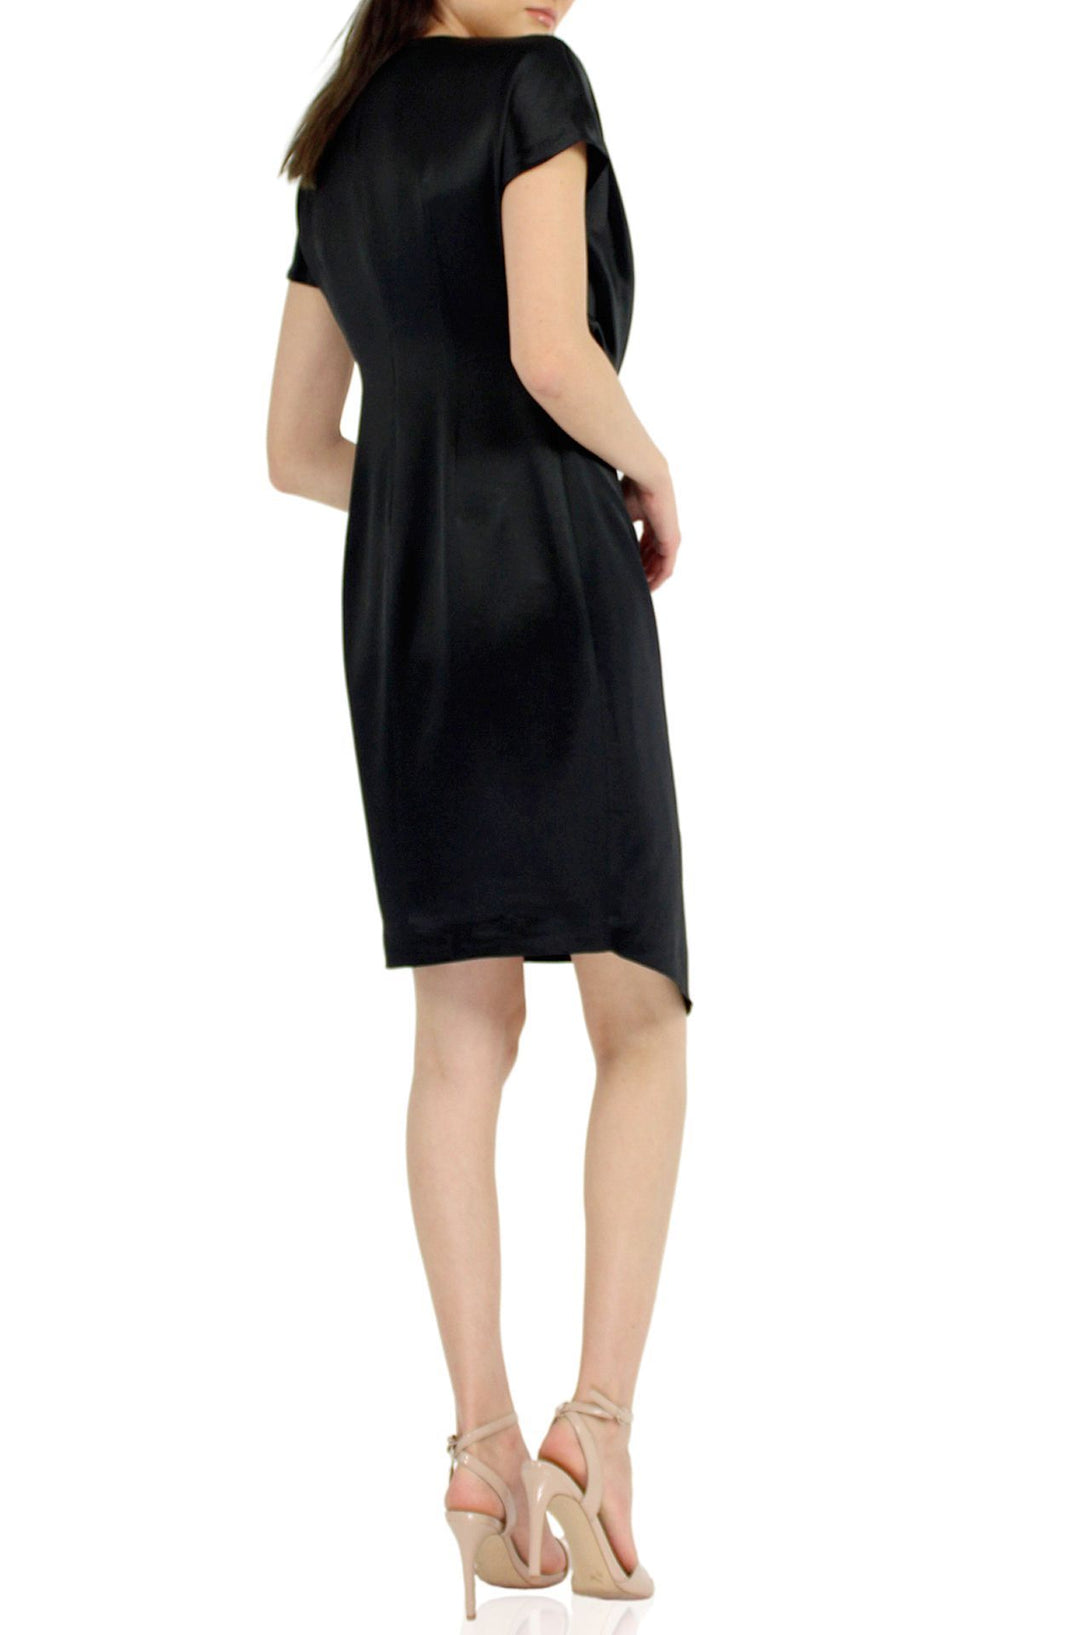 Mini-Belted-Dress-In-Black-By-Kyle-Richard